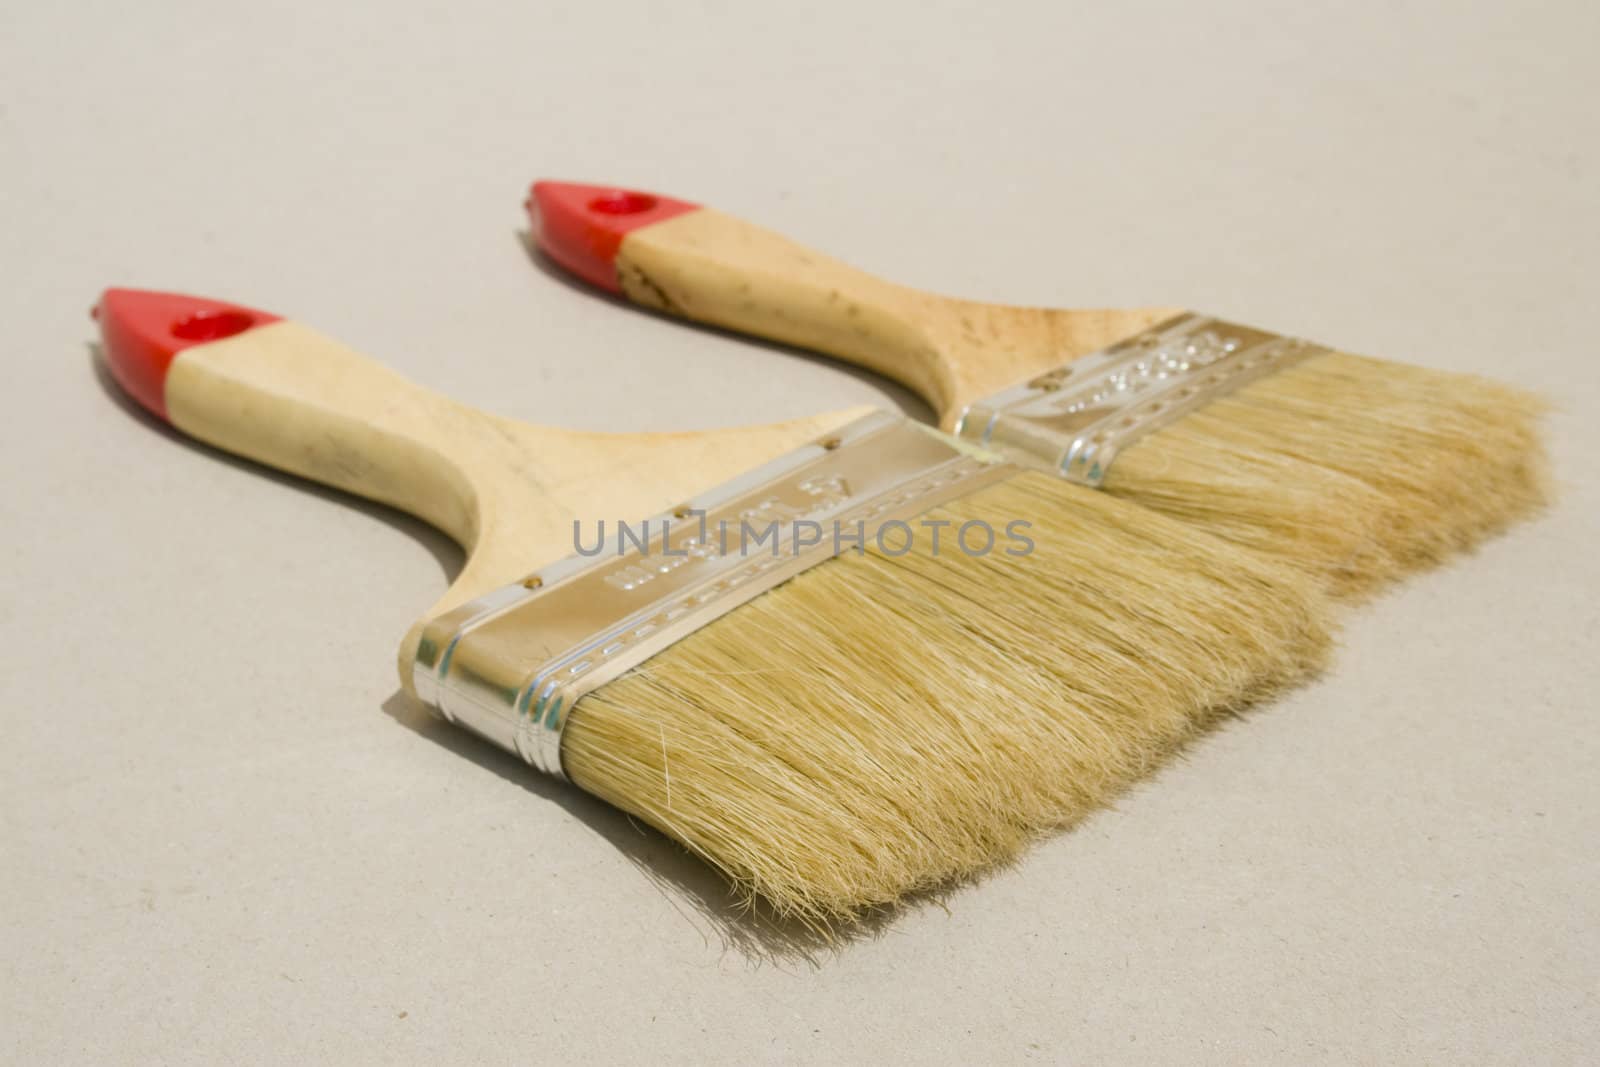 A set of paint brushes isolated against a plain background